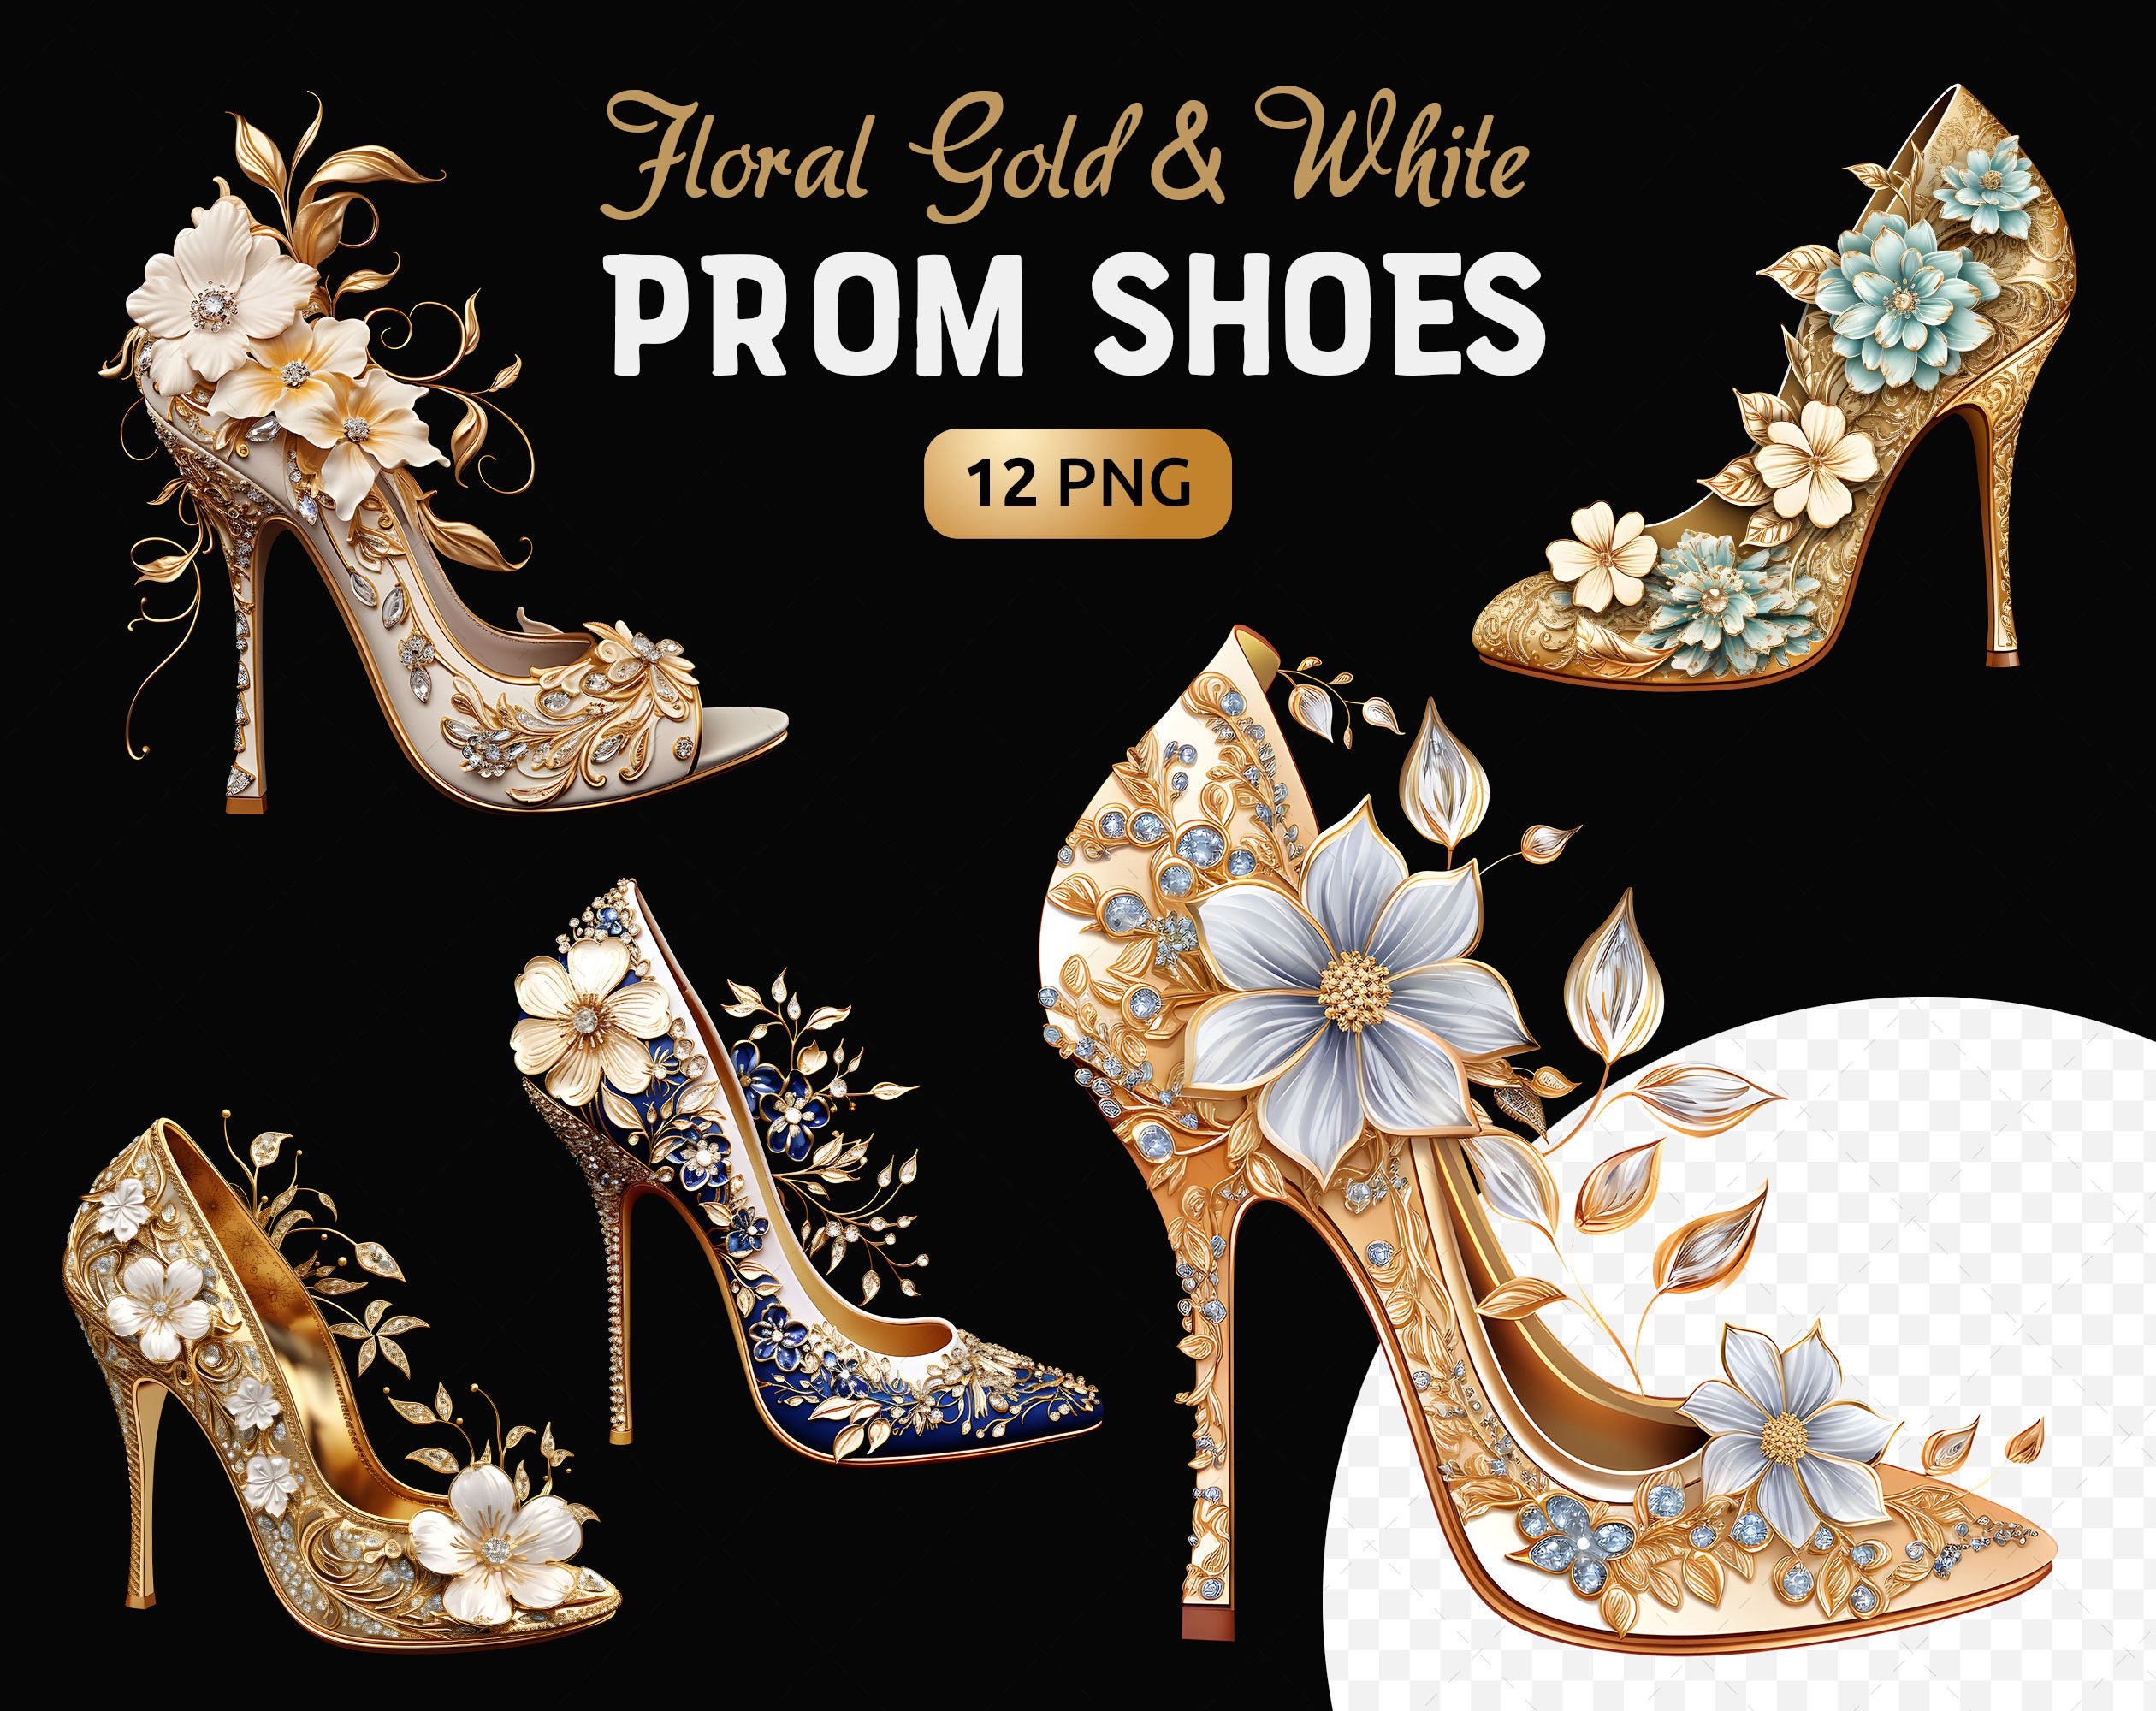 10 High Heels That You Will Want To Rock On Prom Night - Society19